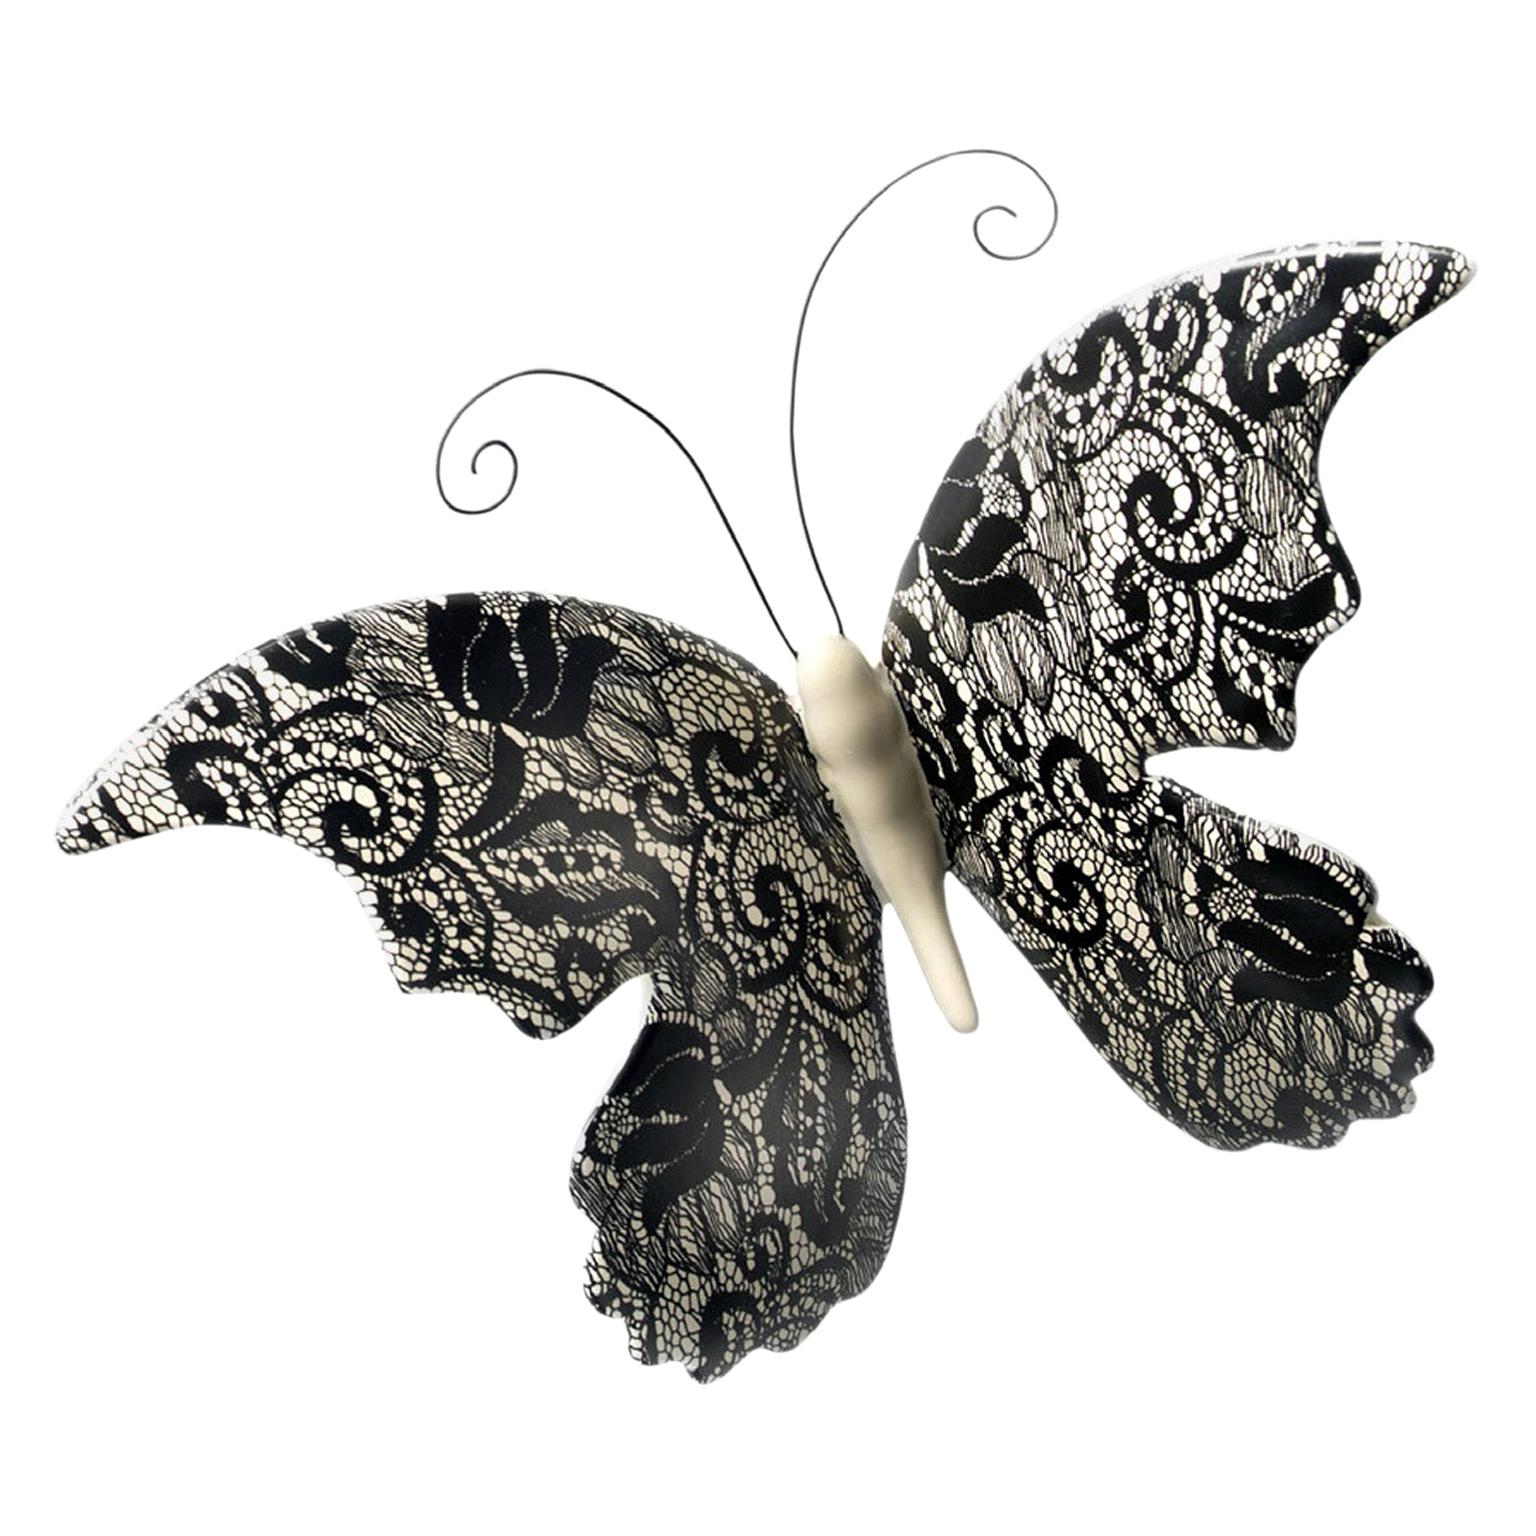 Ceramic "BUTTERFLY" with Lace Decoration by Gabriella B. Made in Italy